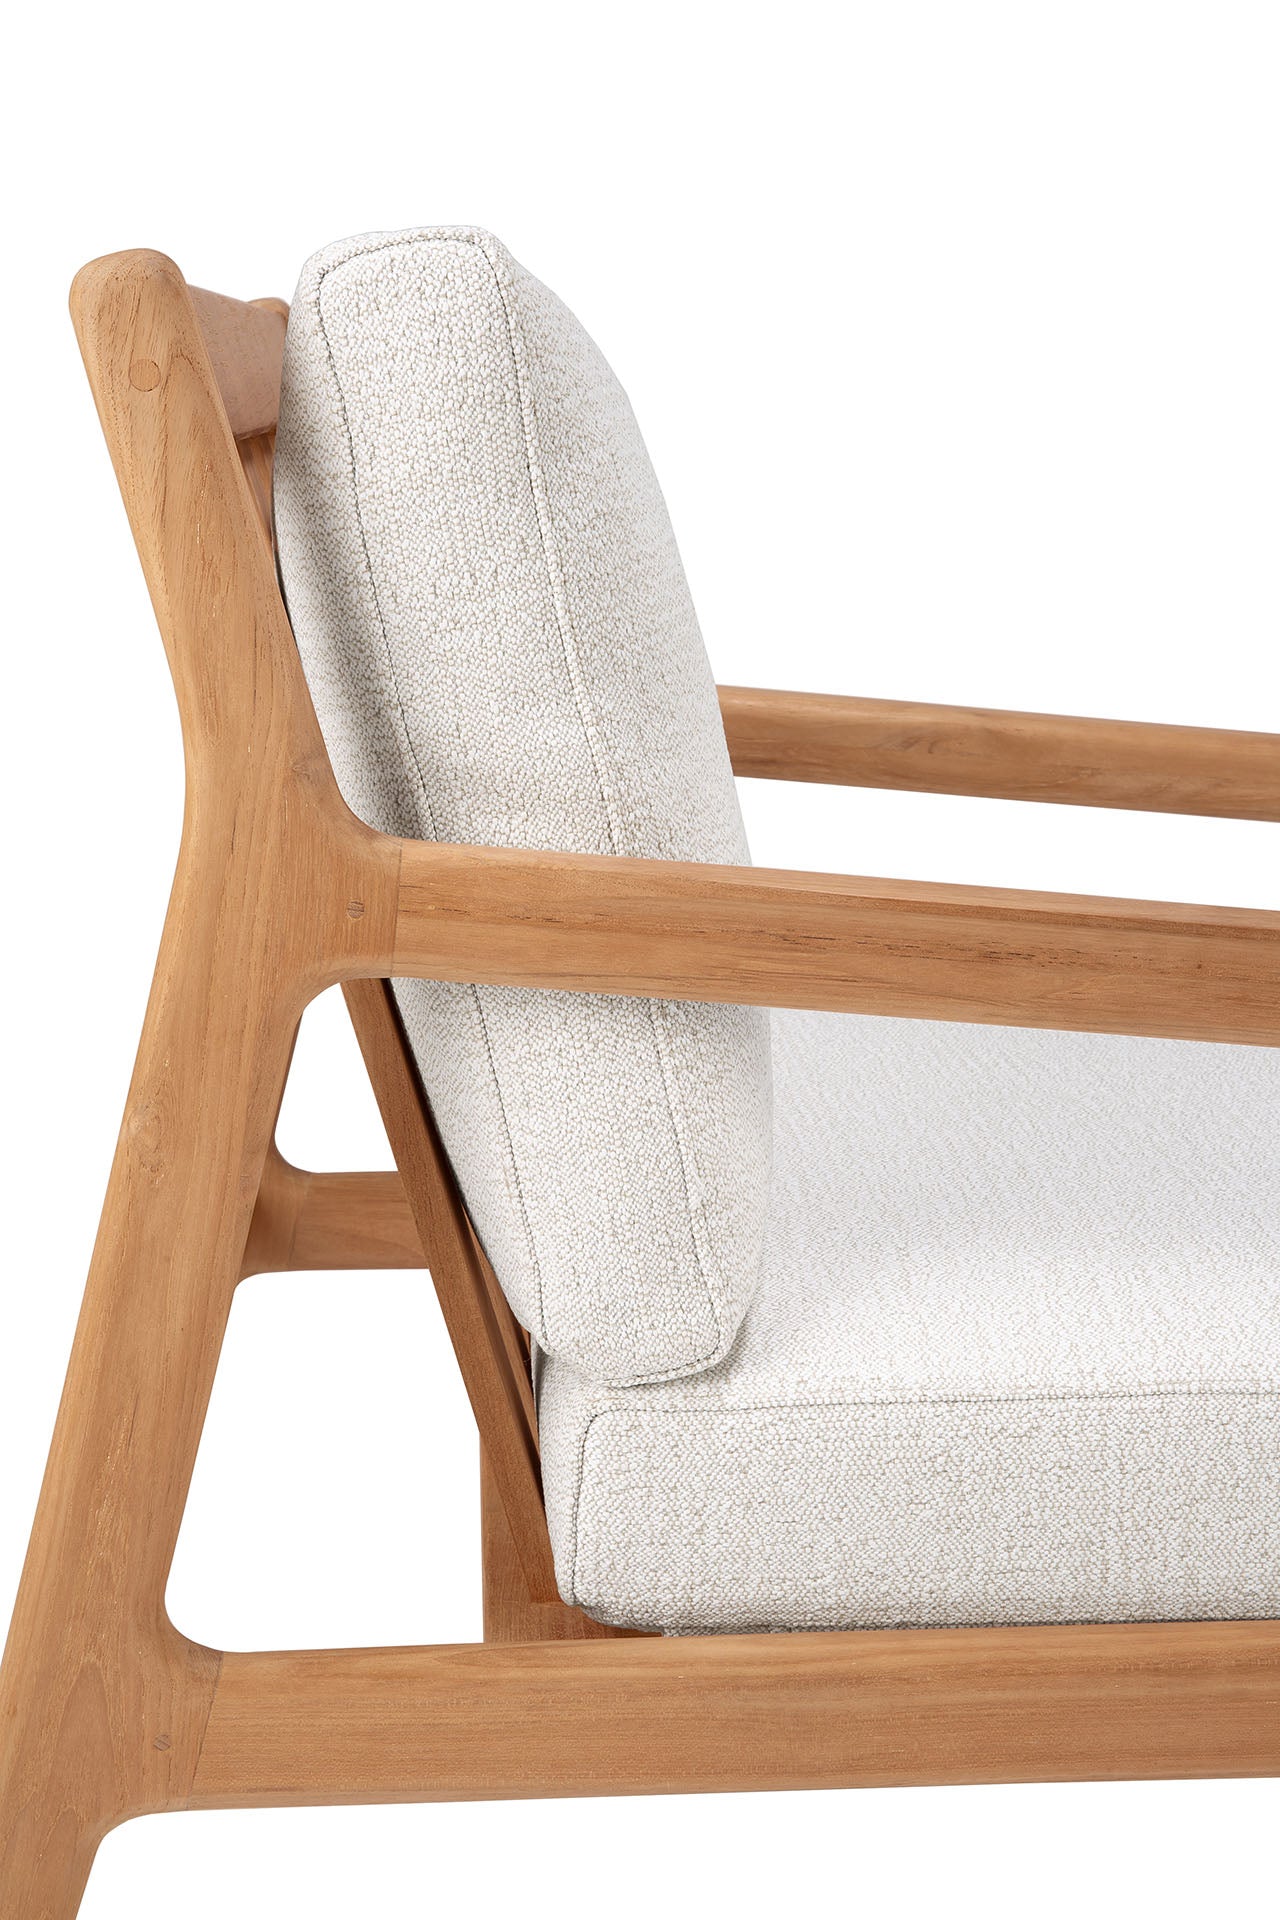 Jack Solid Teak Outdoor Lounge Chair, Off White Fabric